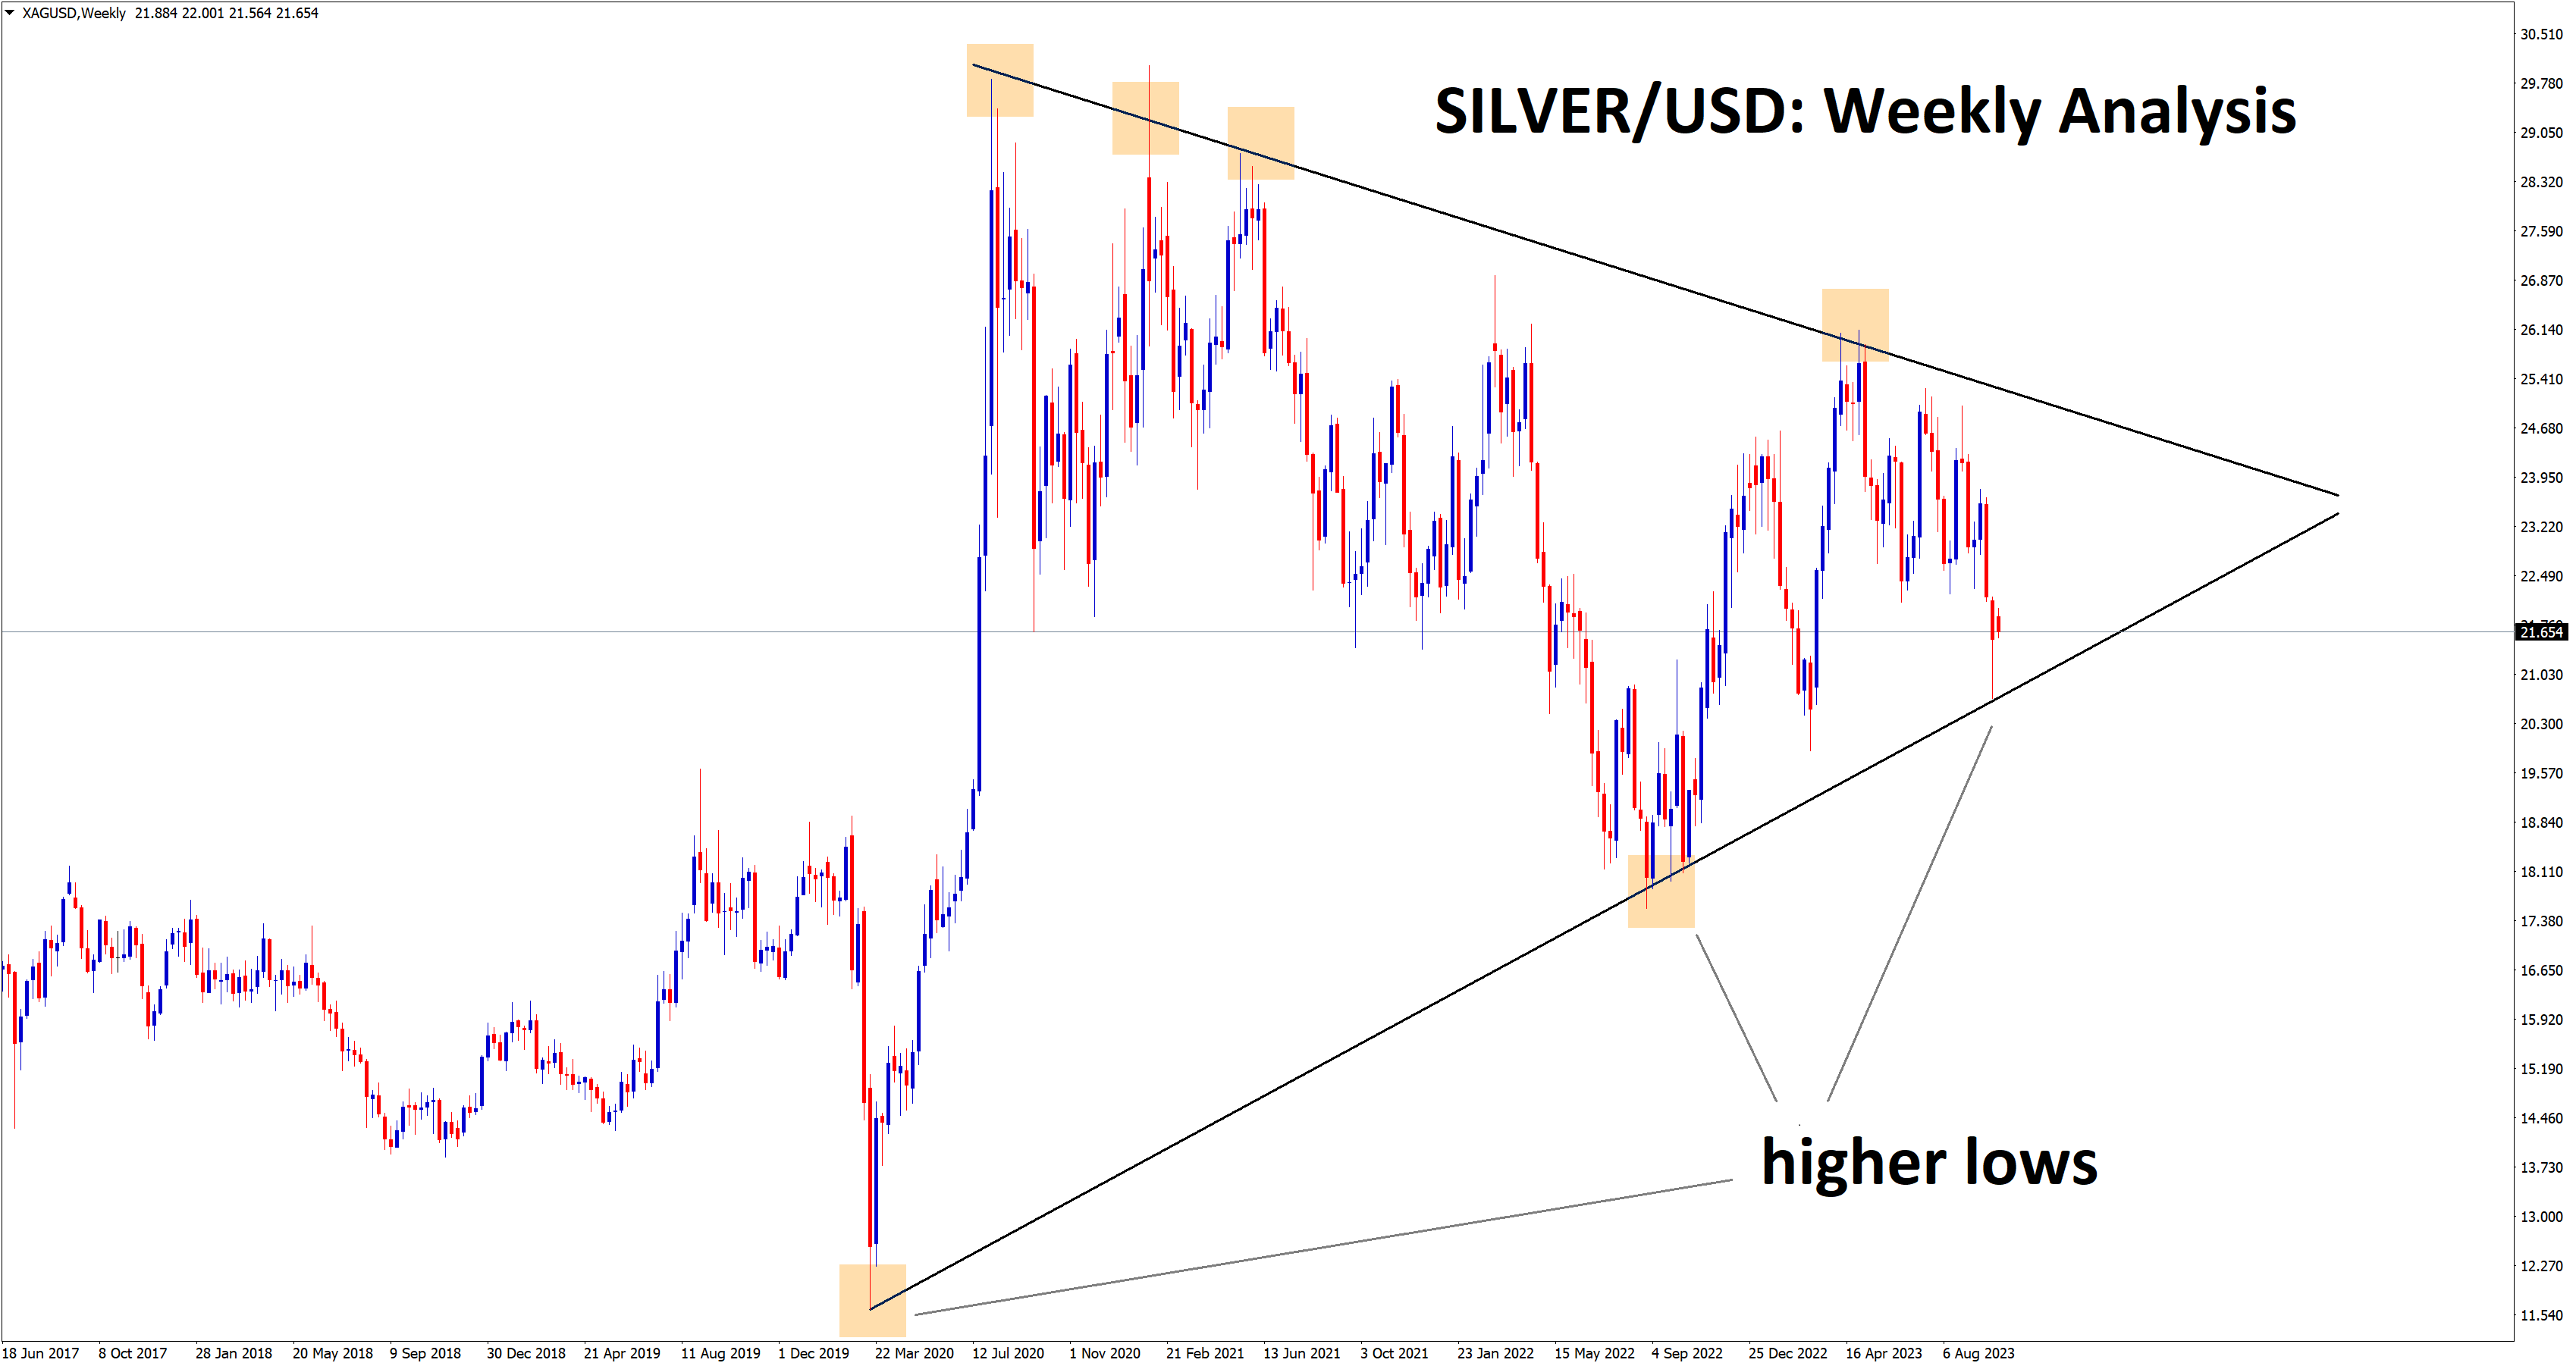 silver at higher low of symmetrical triangle